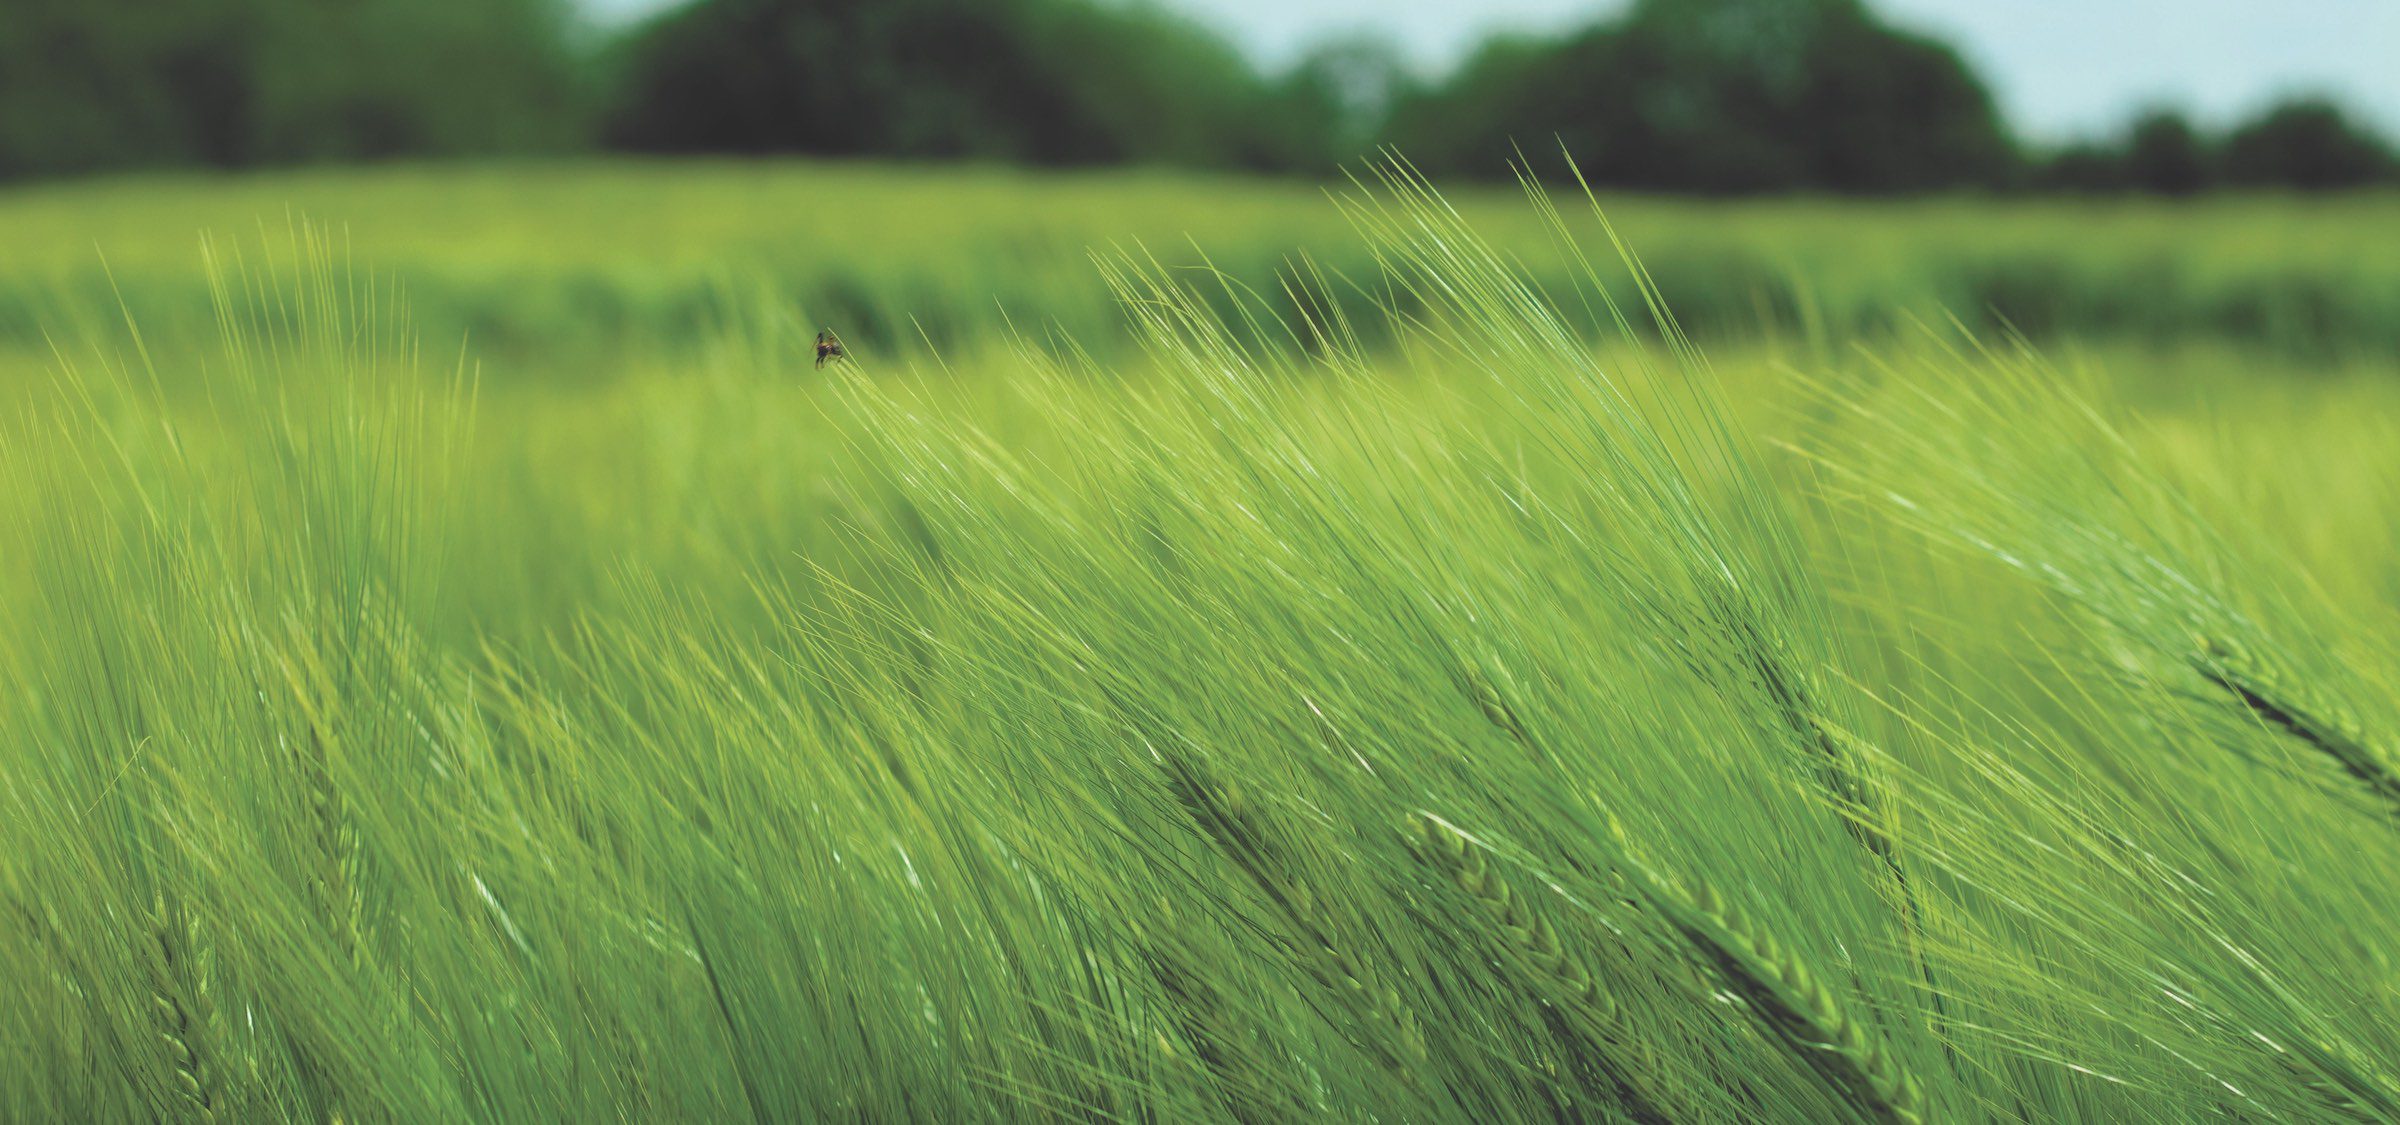 background image of a wheat field